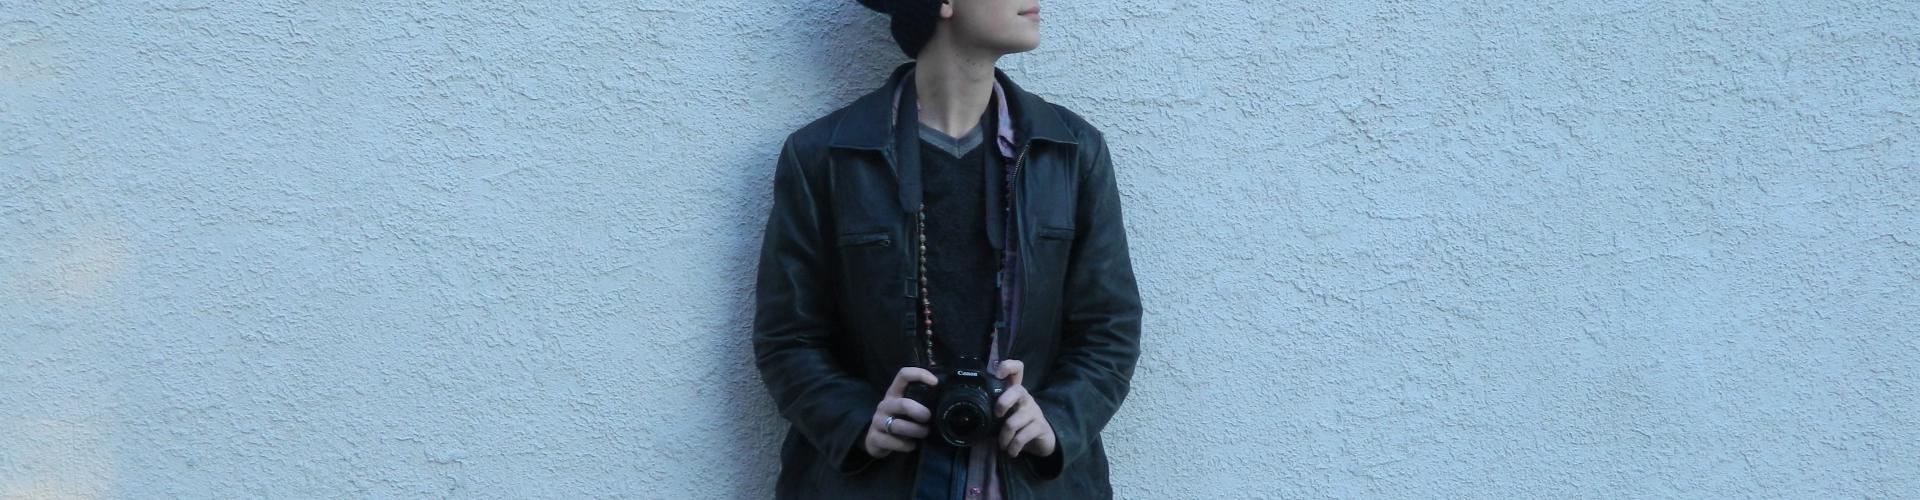 A person leaning against the wall carrying a Canon camera in their hands